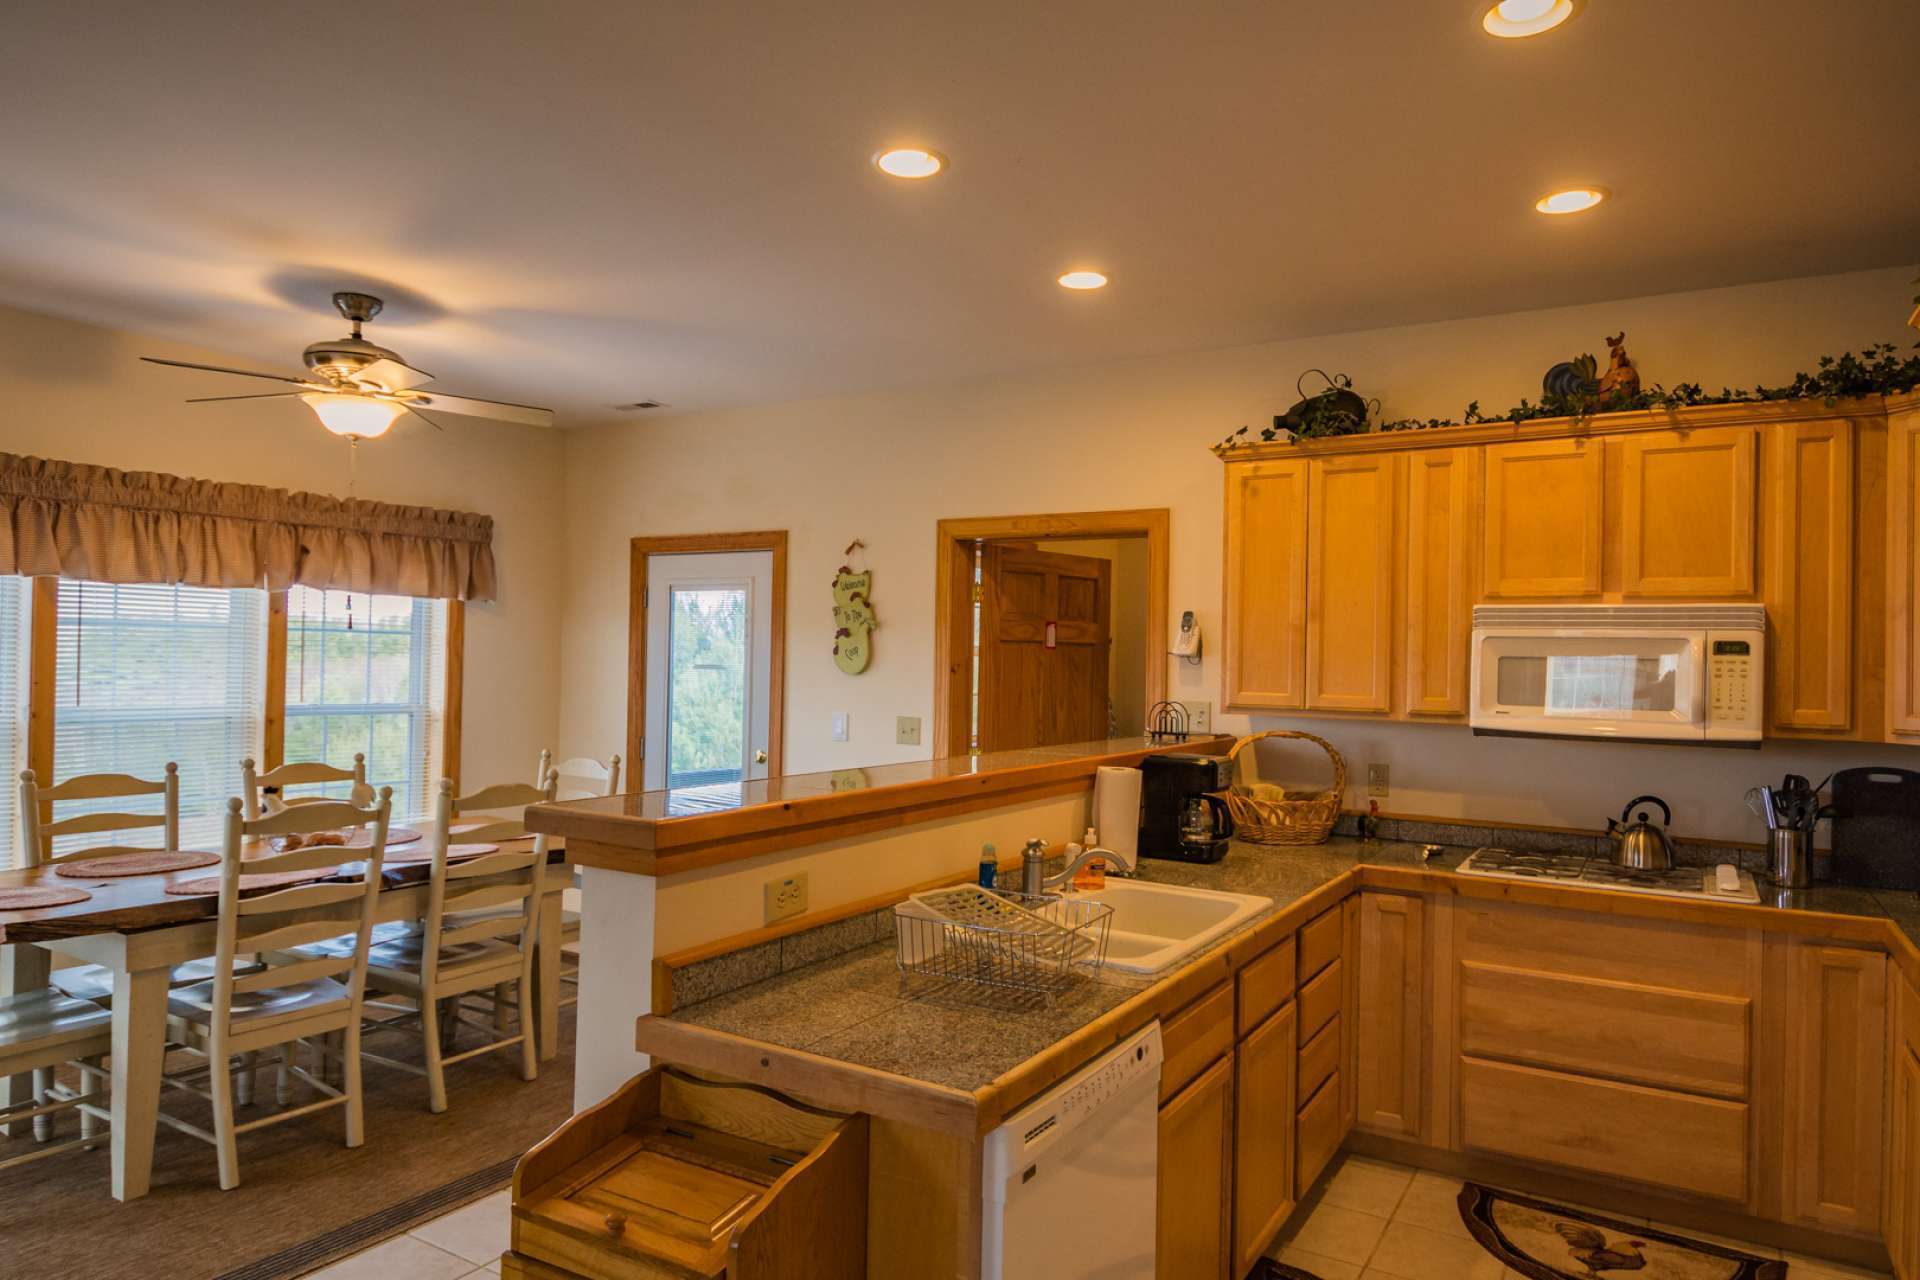 Just off the kitchen is the laundry area with additional storage space, and access to the private deck with hot tub.